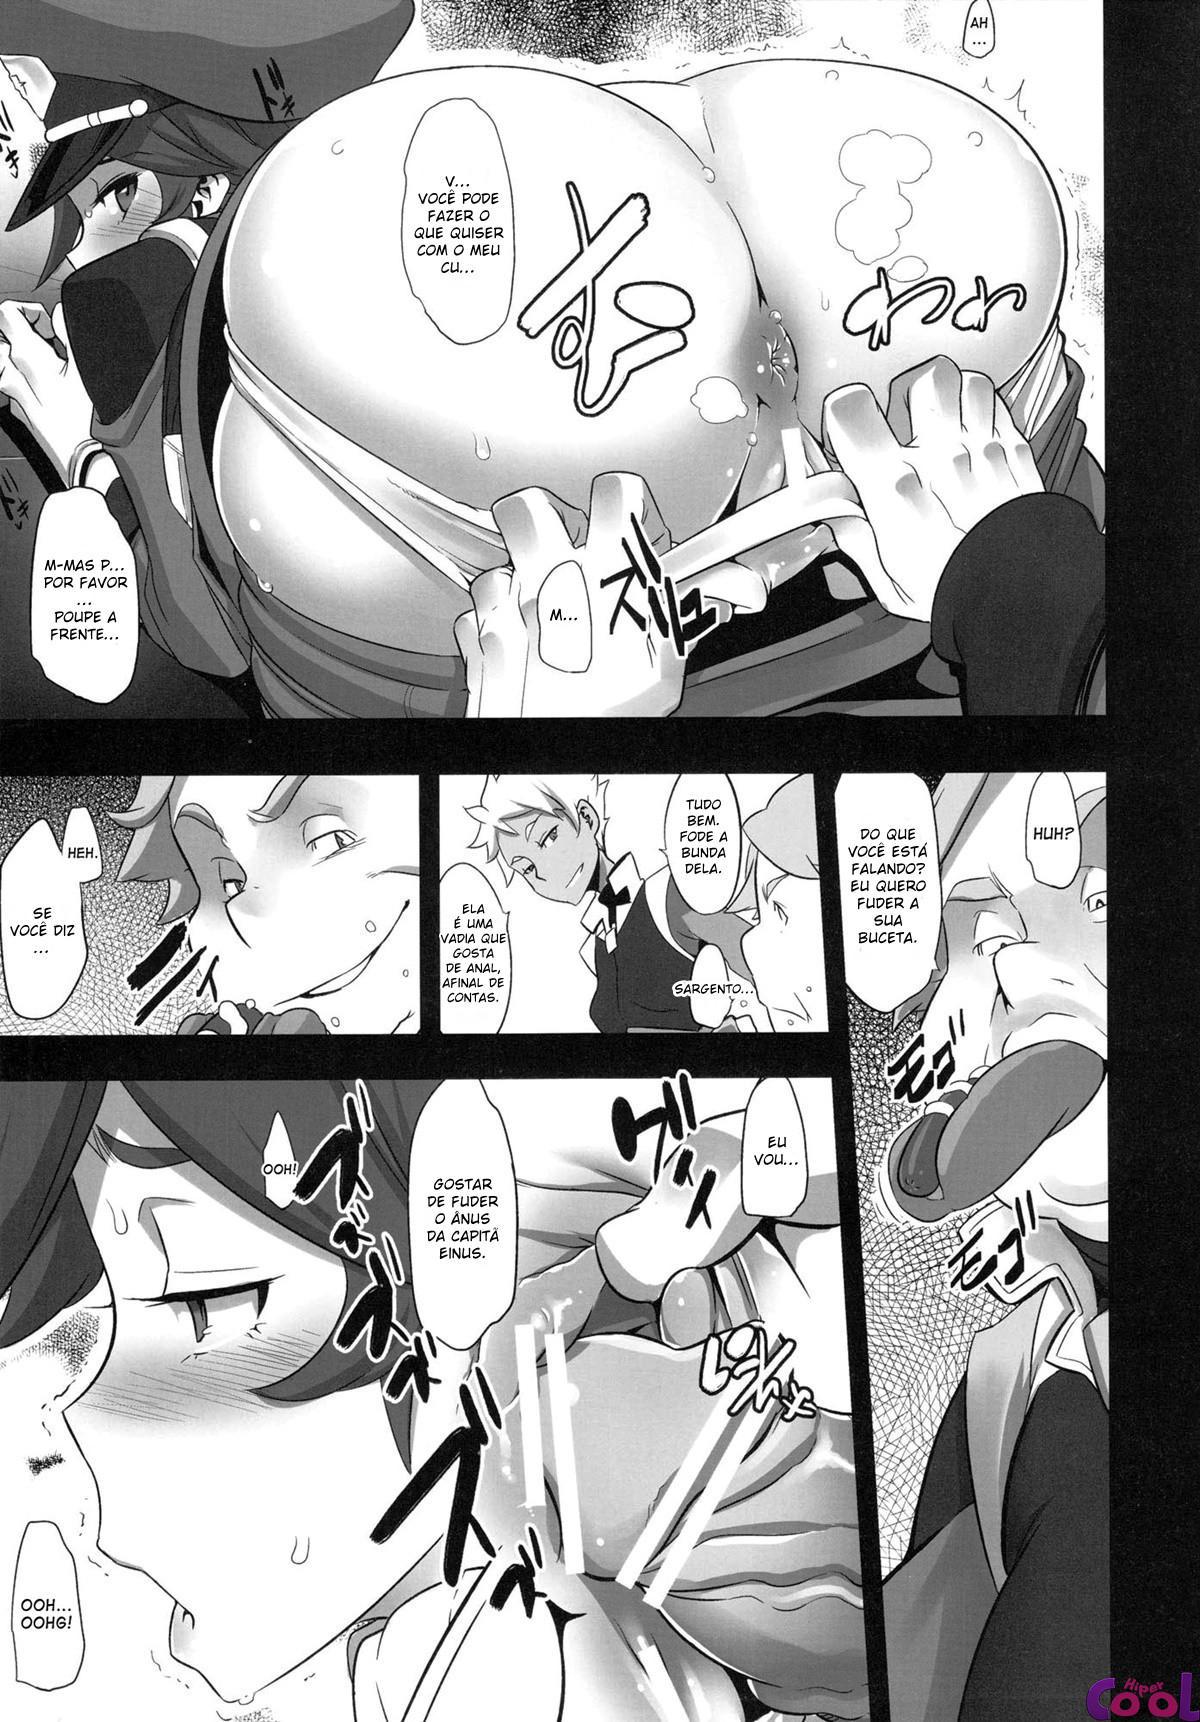 dame-kanchou-or-useless-captain-chapter-01-page-4.jpg